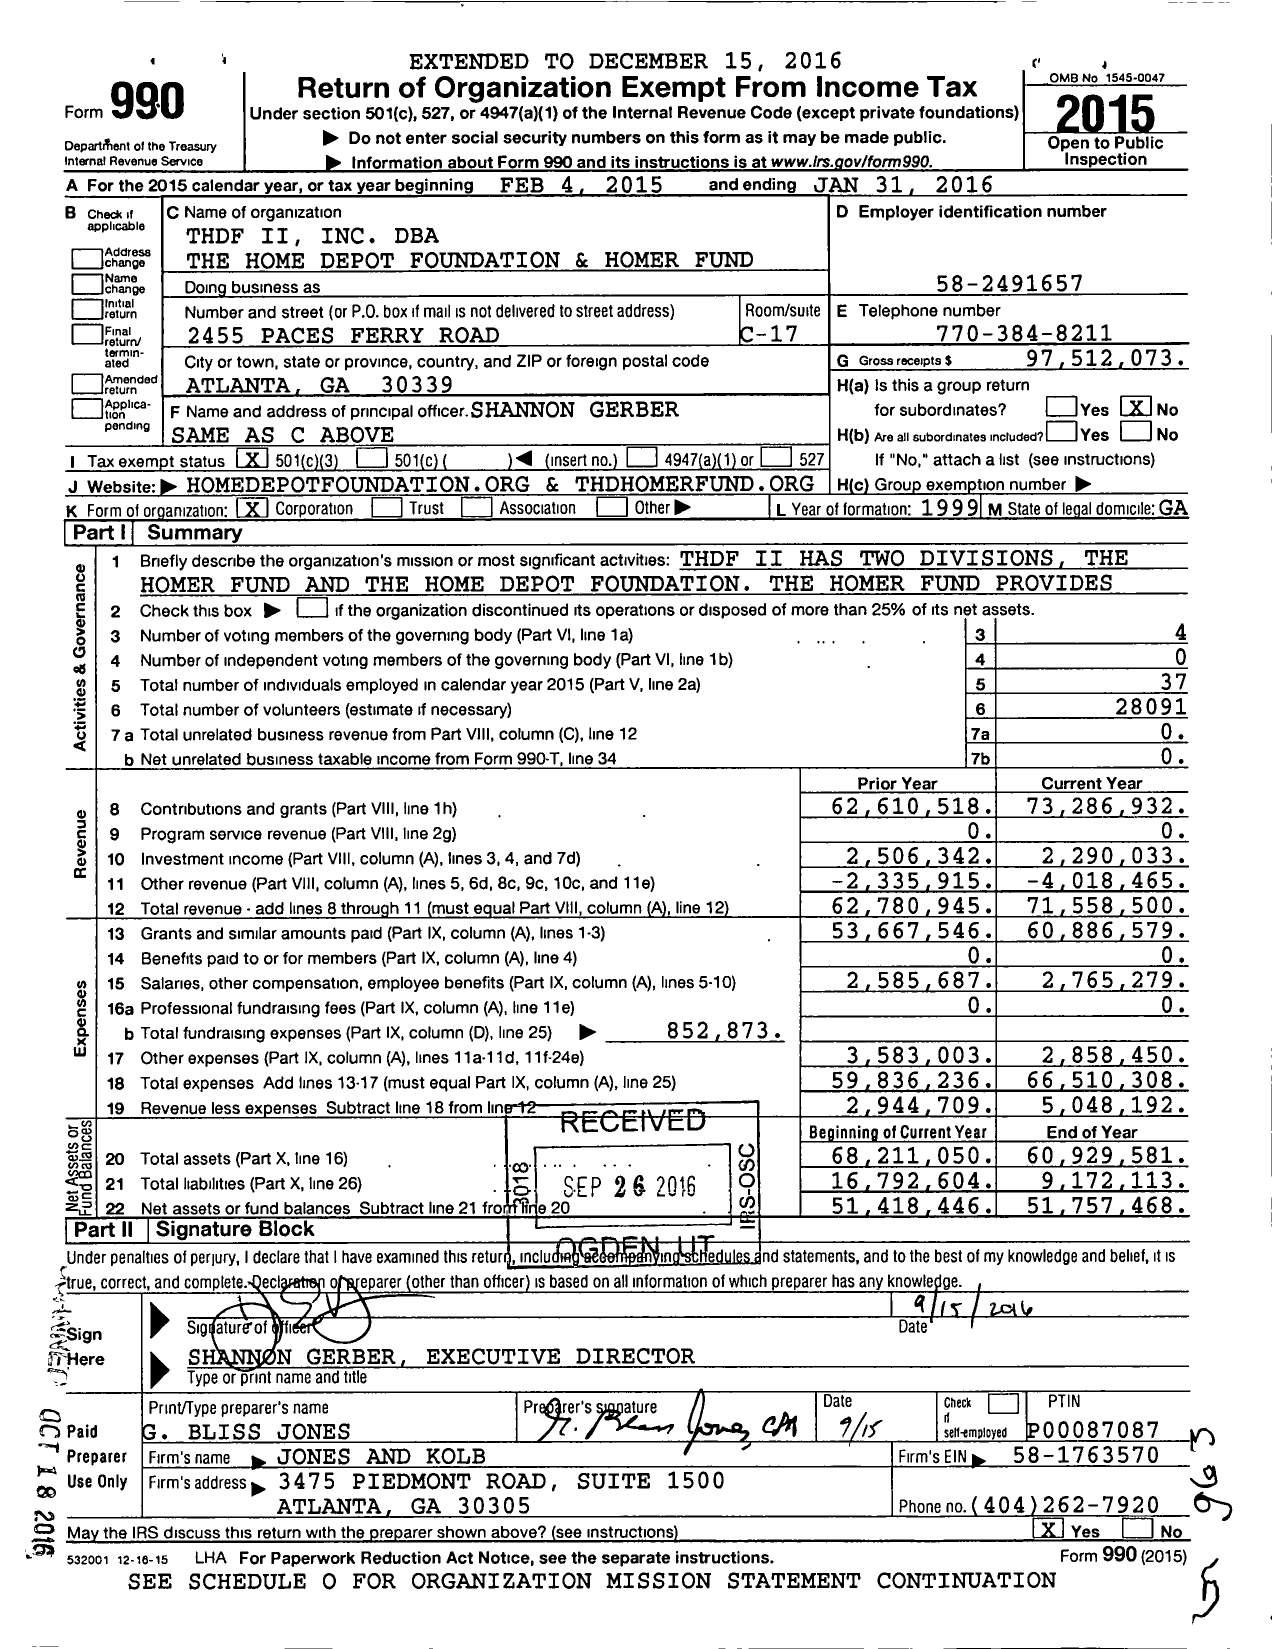 Image of first page of 2015 Form 990 for The Home Depot Foundation and Homer Fund